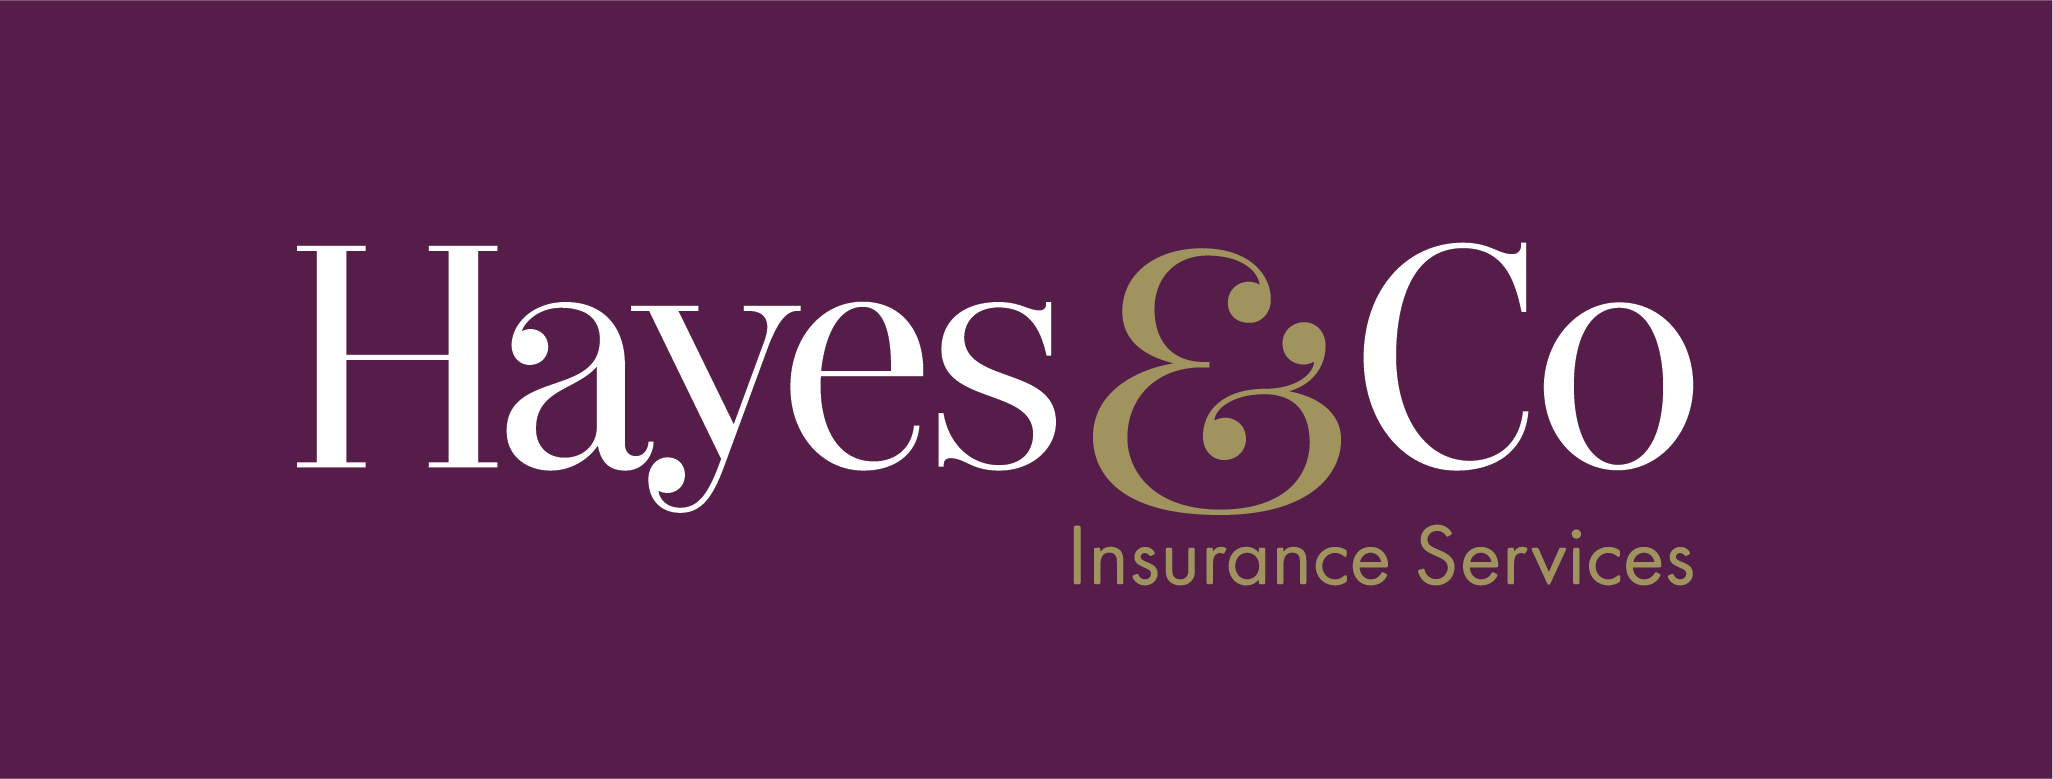 Hayes & Co Insurance Services